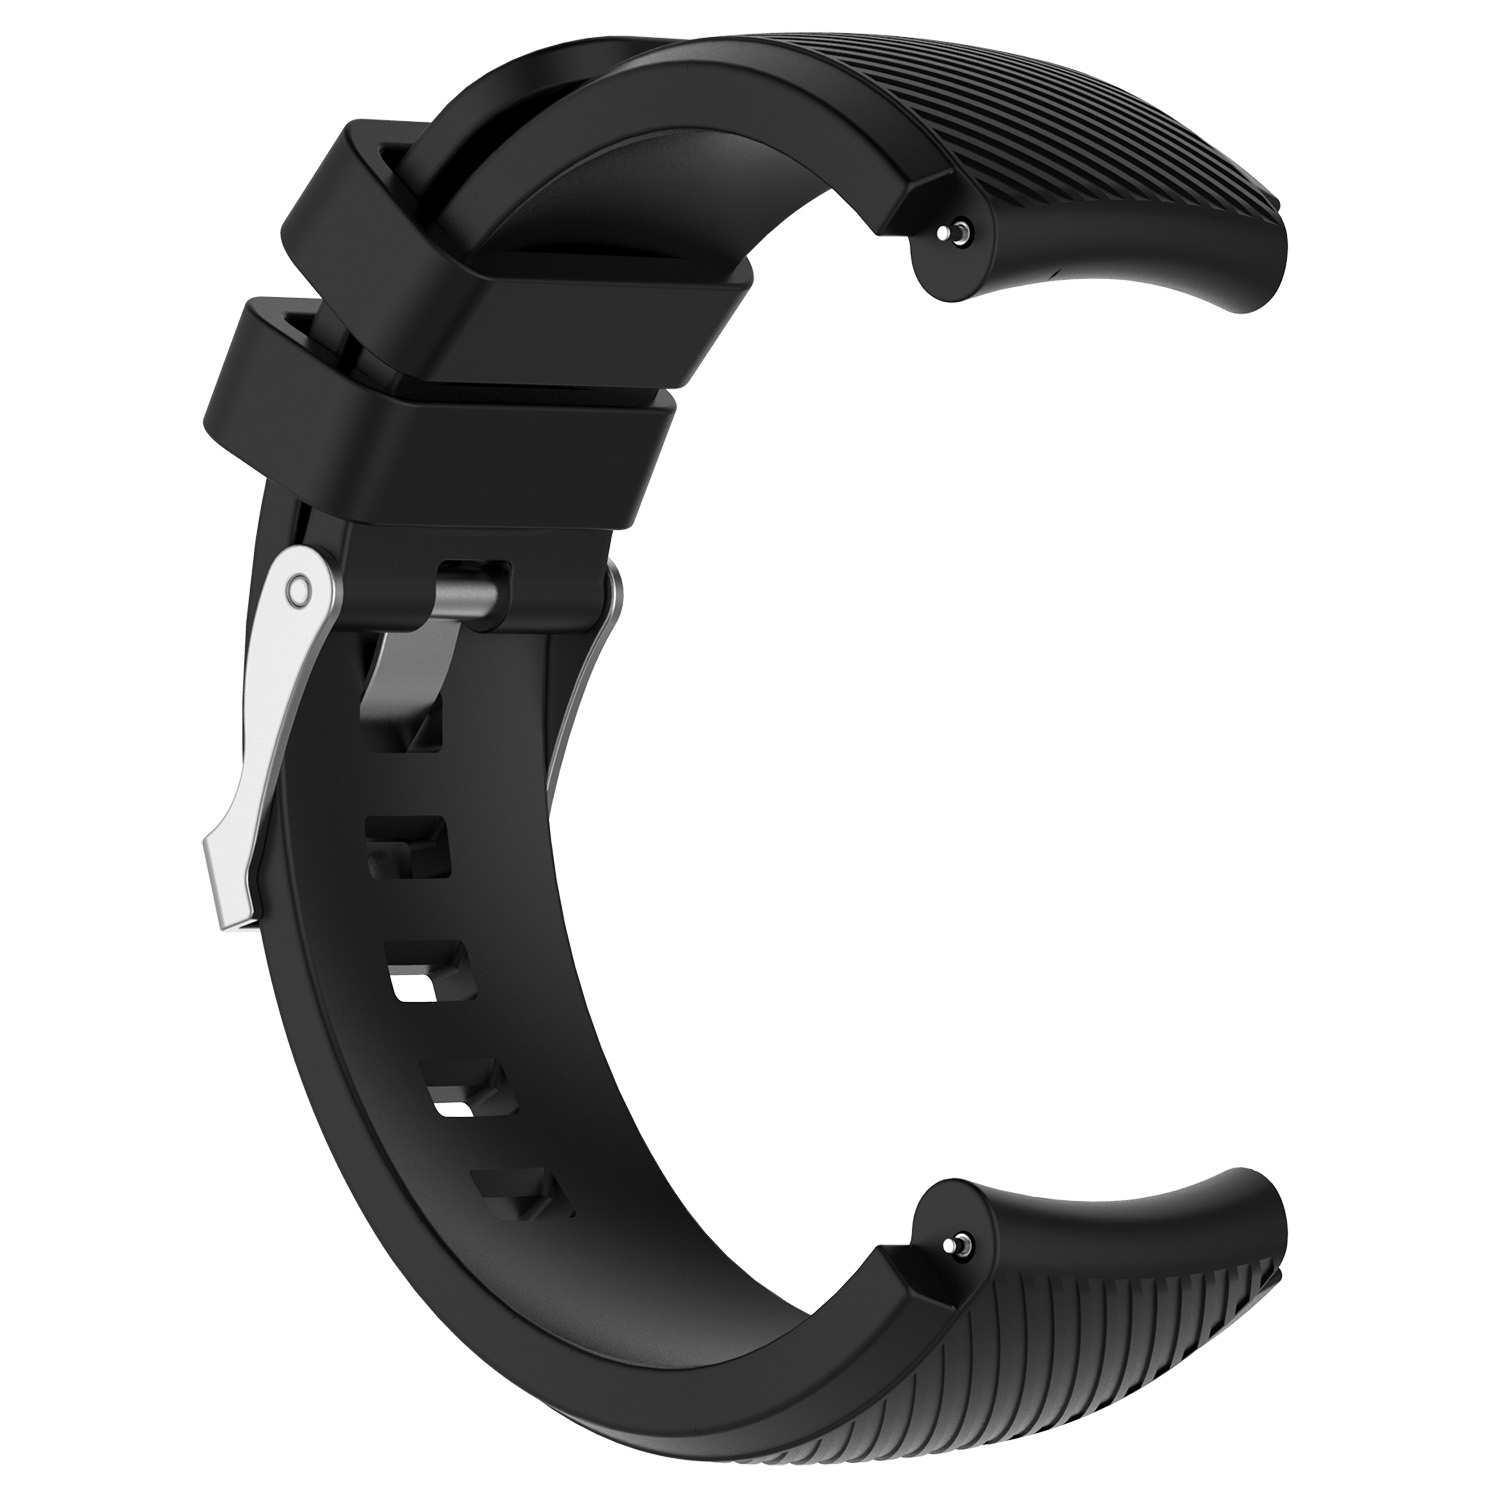 Bakeey-22mm-Universal-Watch-Band-Silicone-Watch-Strap-Replacement-for-HUAWEI-Watch-GT-1730954-4